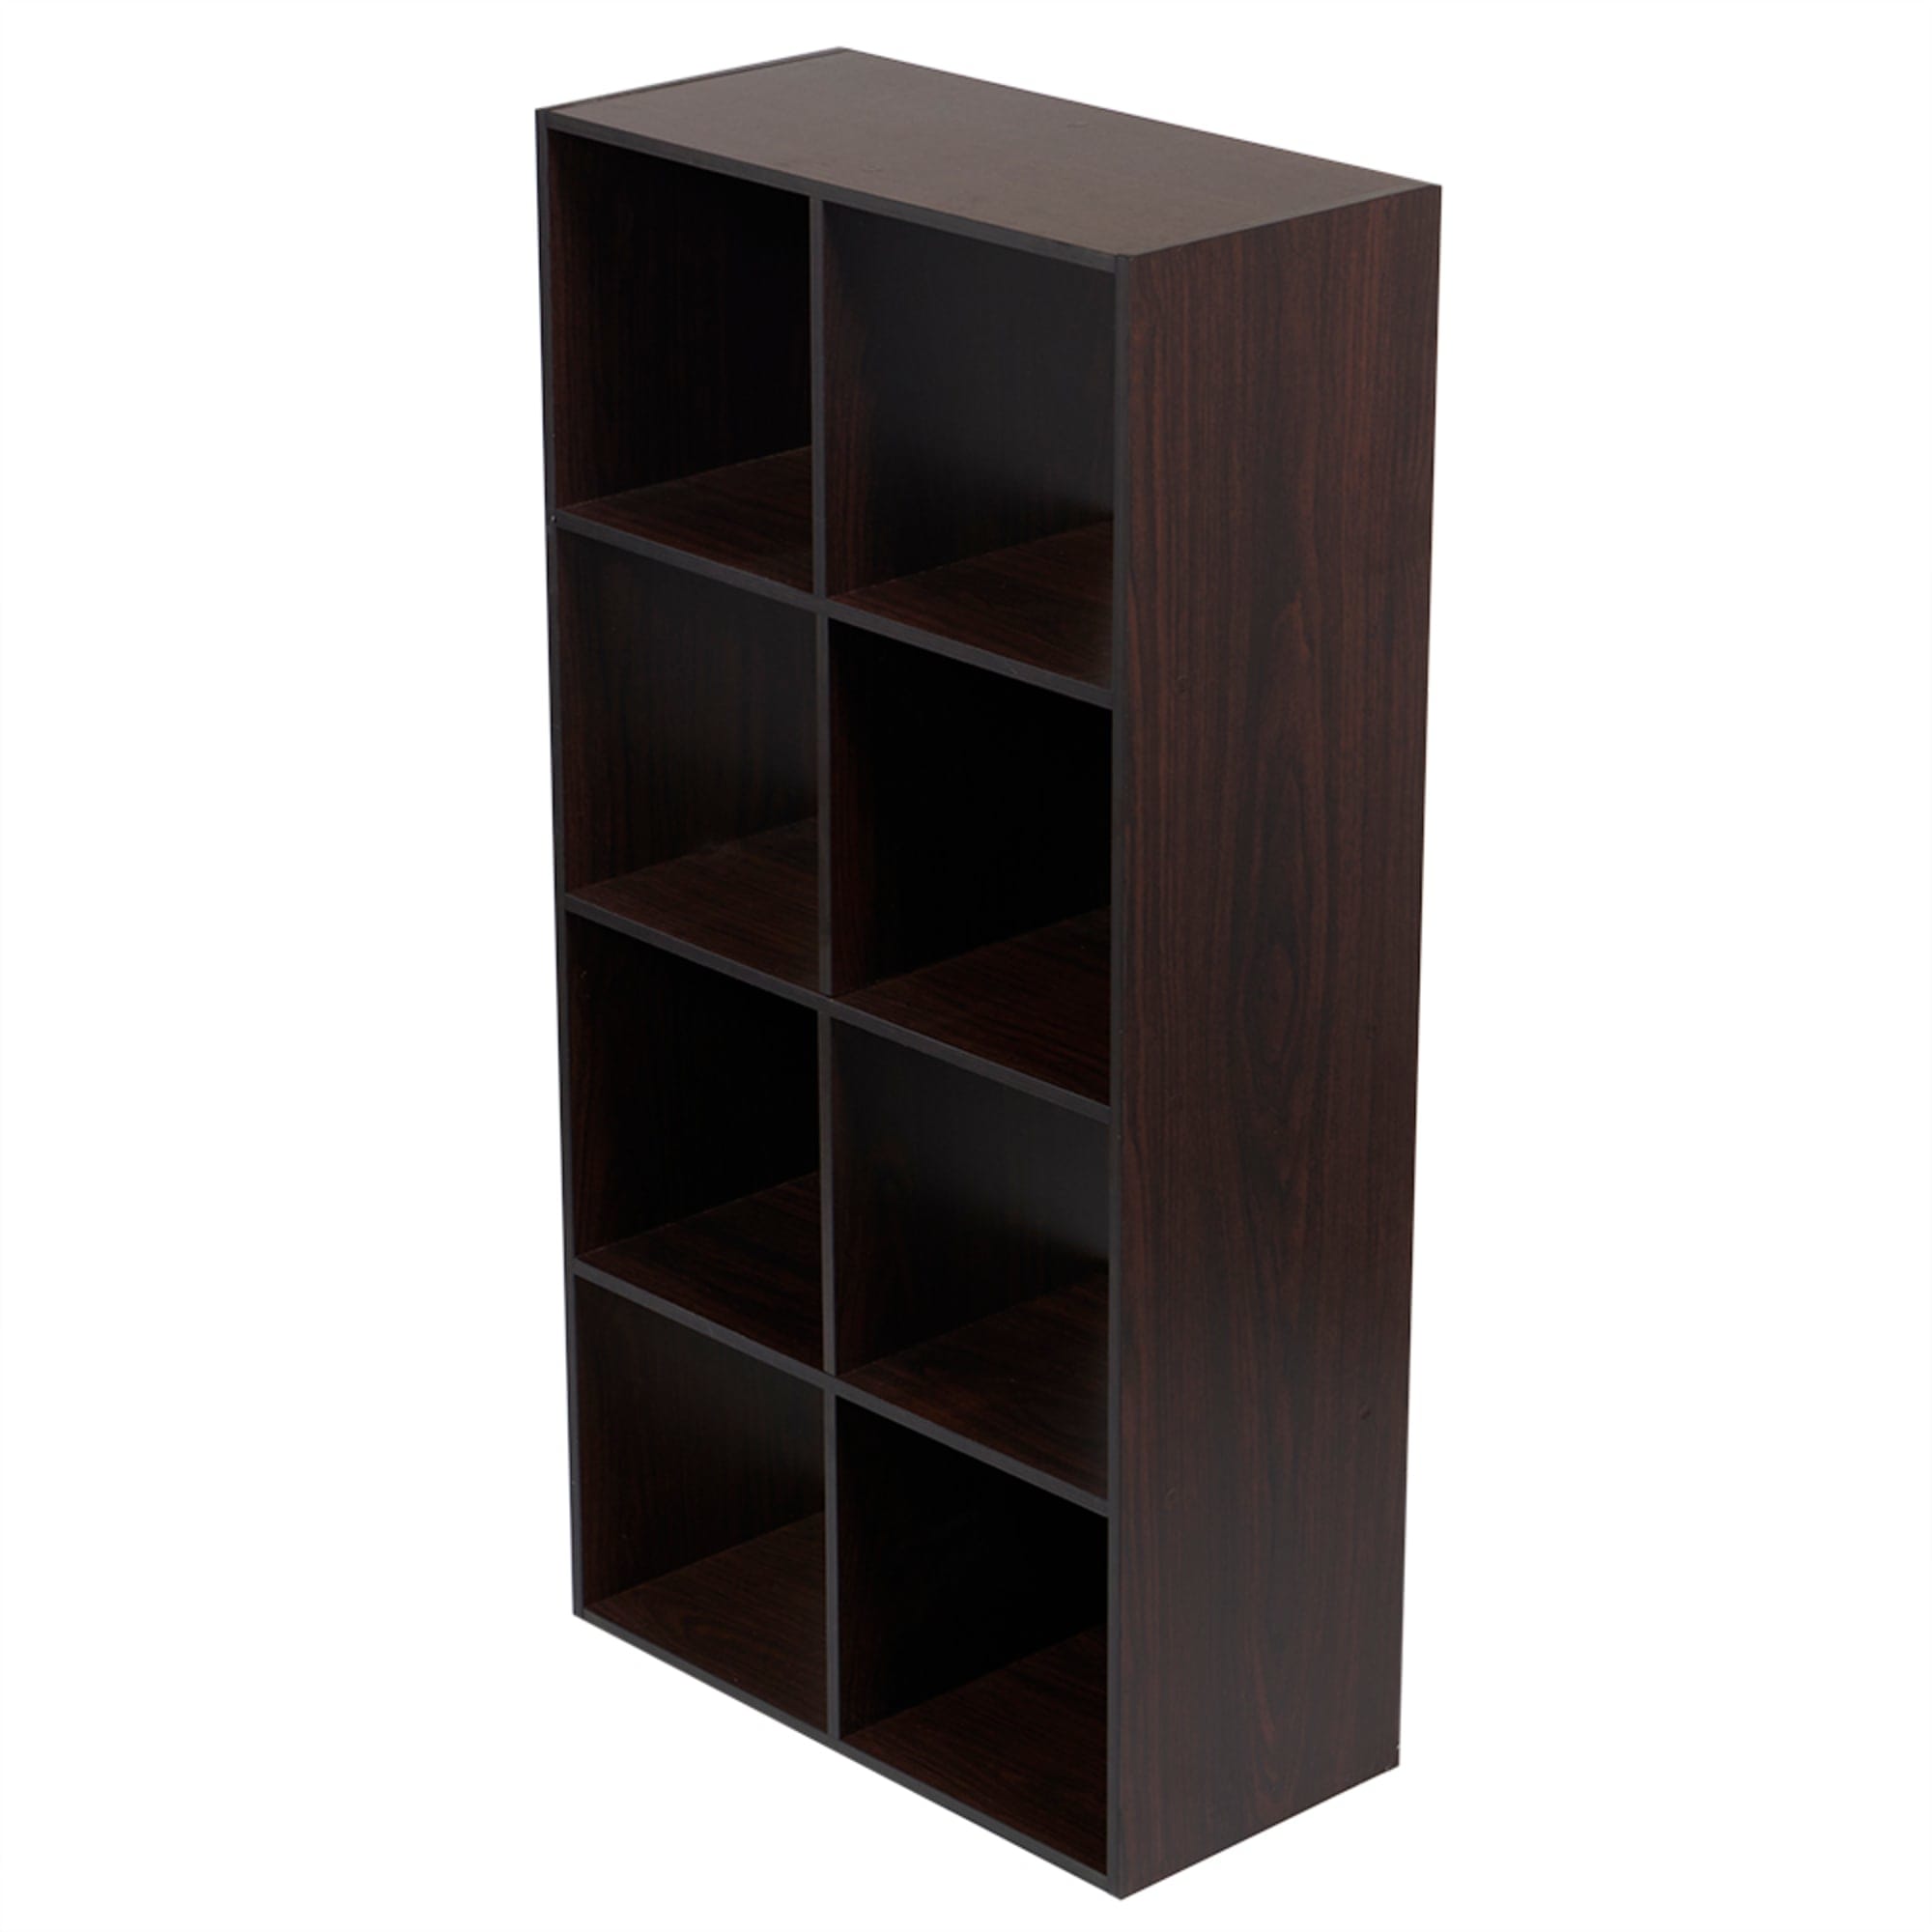 Home Basics Open and Enclosed 8 Cube MDF Storage Organizer, Espresso $50.00 EACH, CASE PACK OF 1